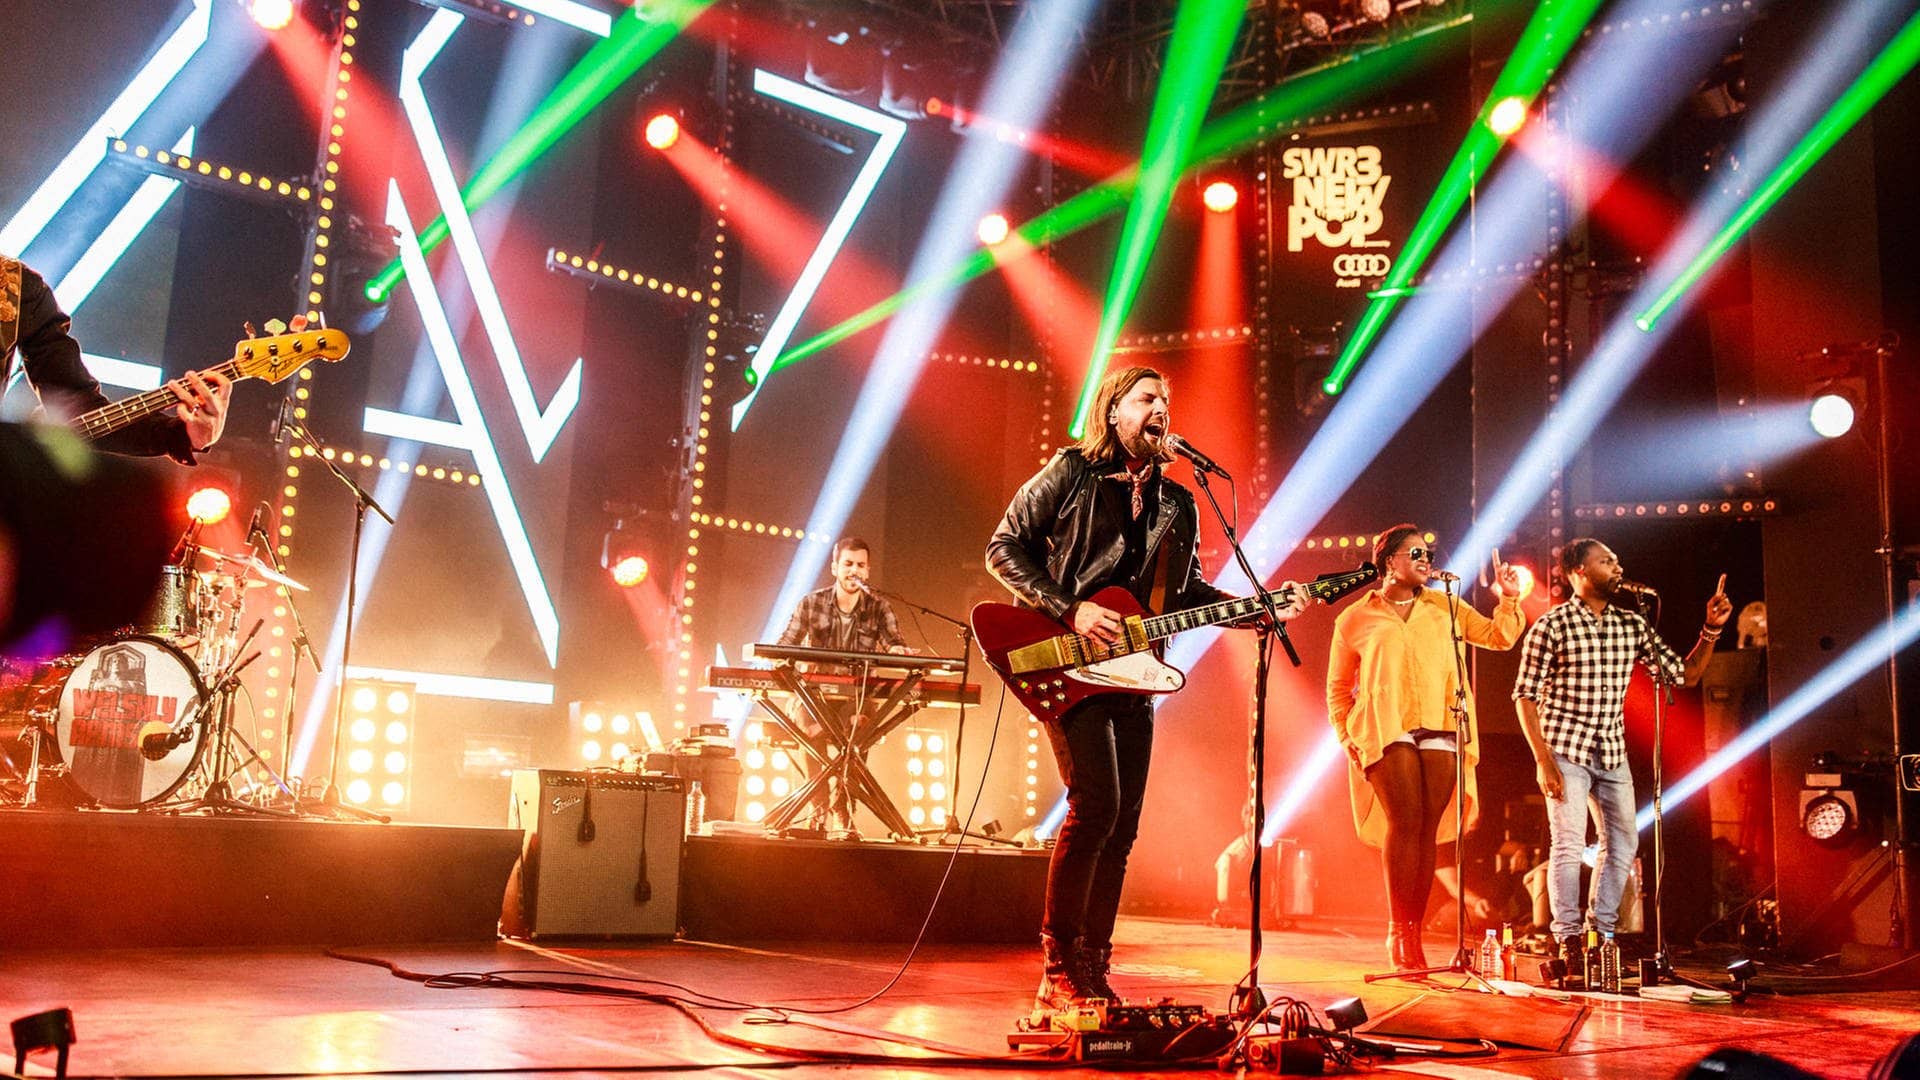 Welshly Arms live beim SWR3 New Pop Festival 2017 (Foto: SWR3)